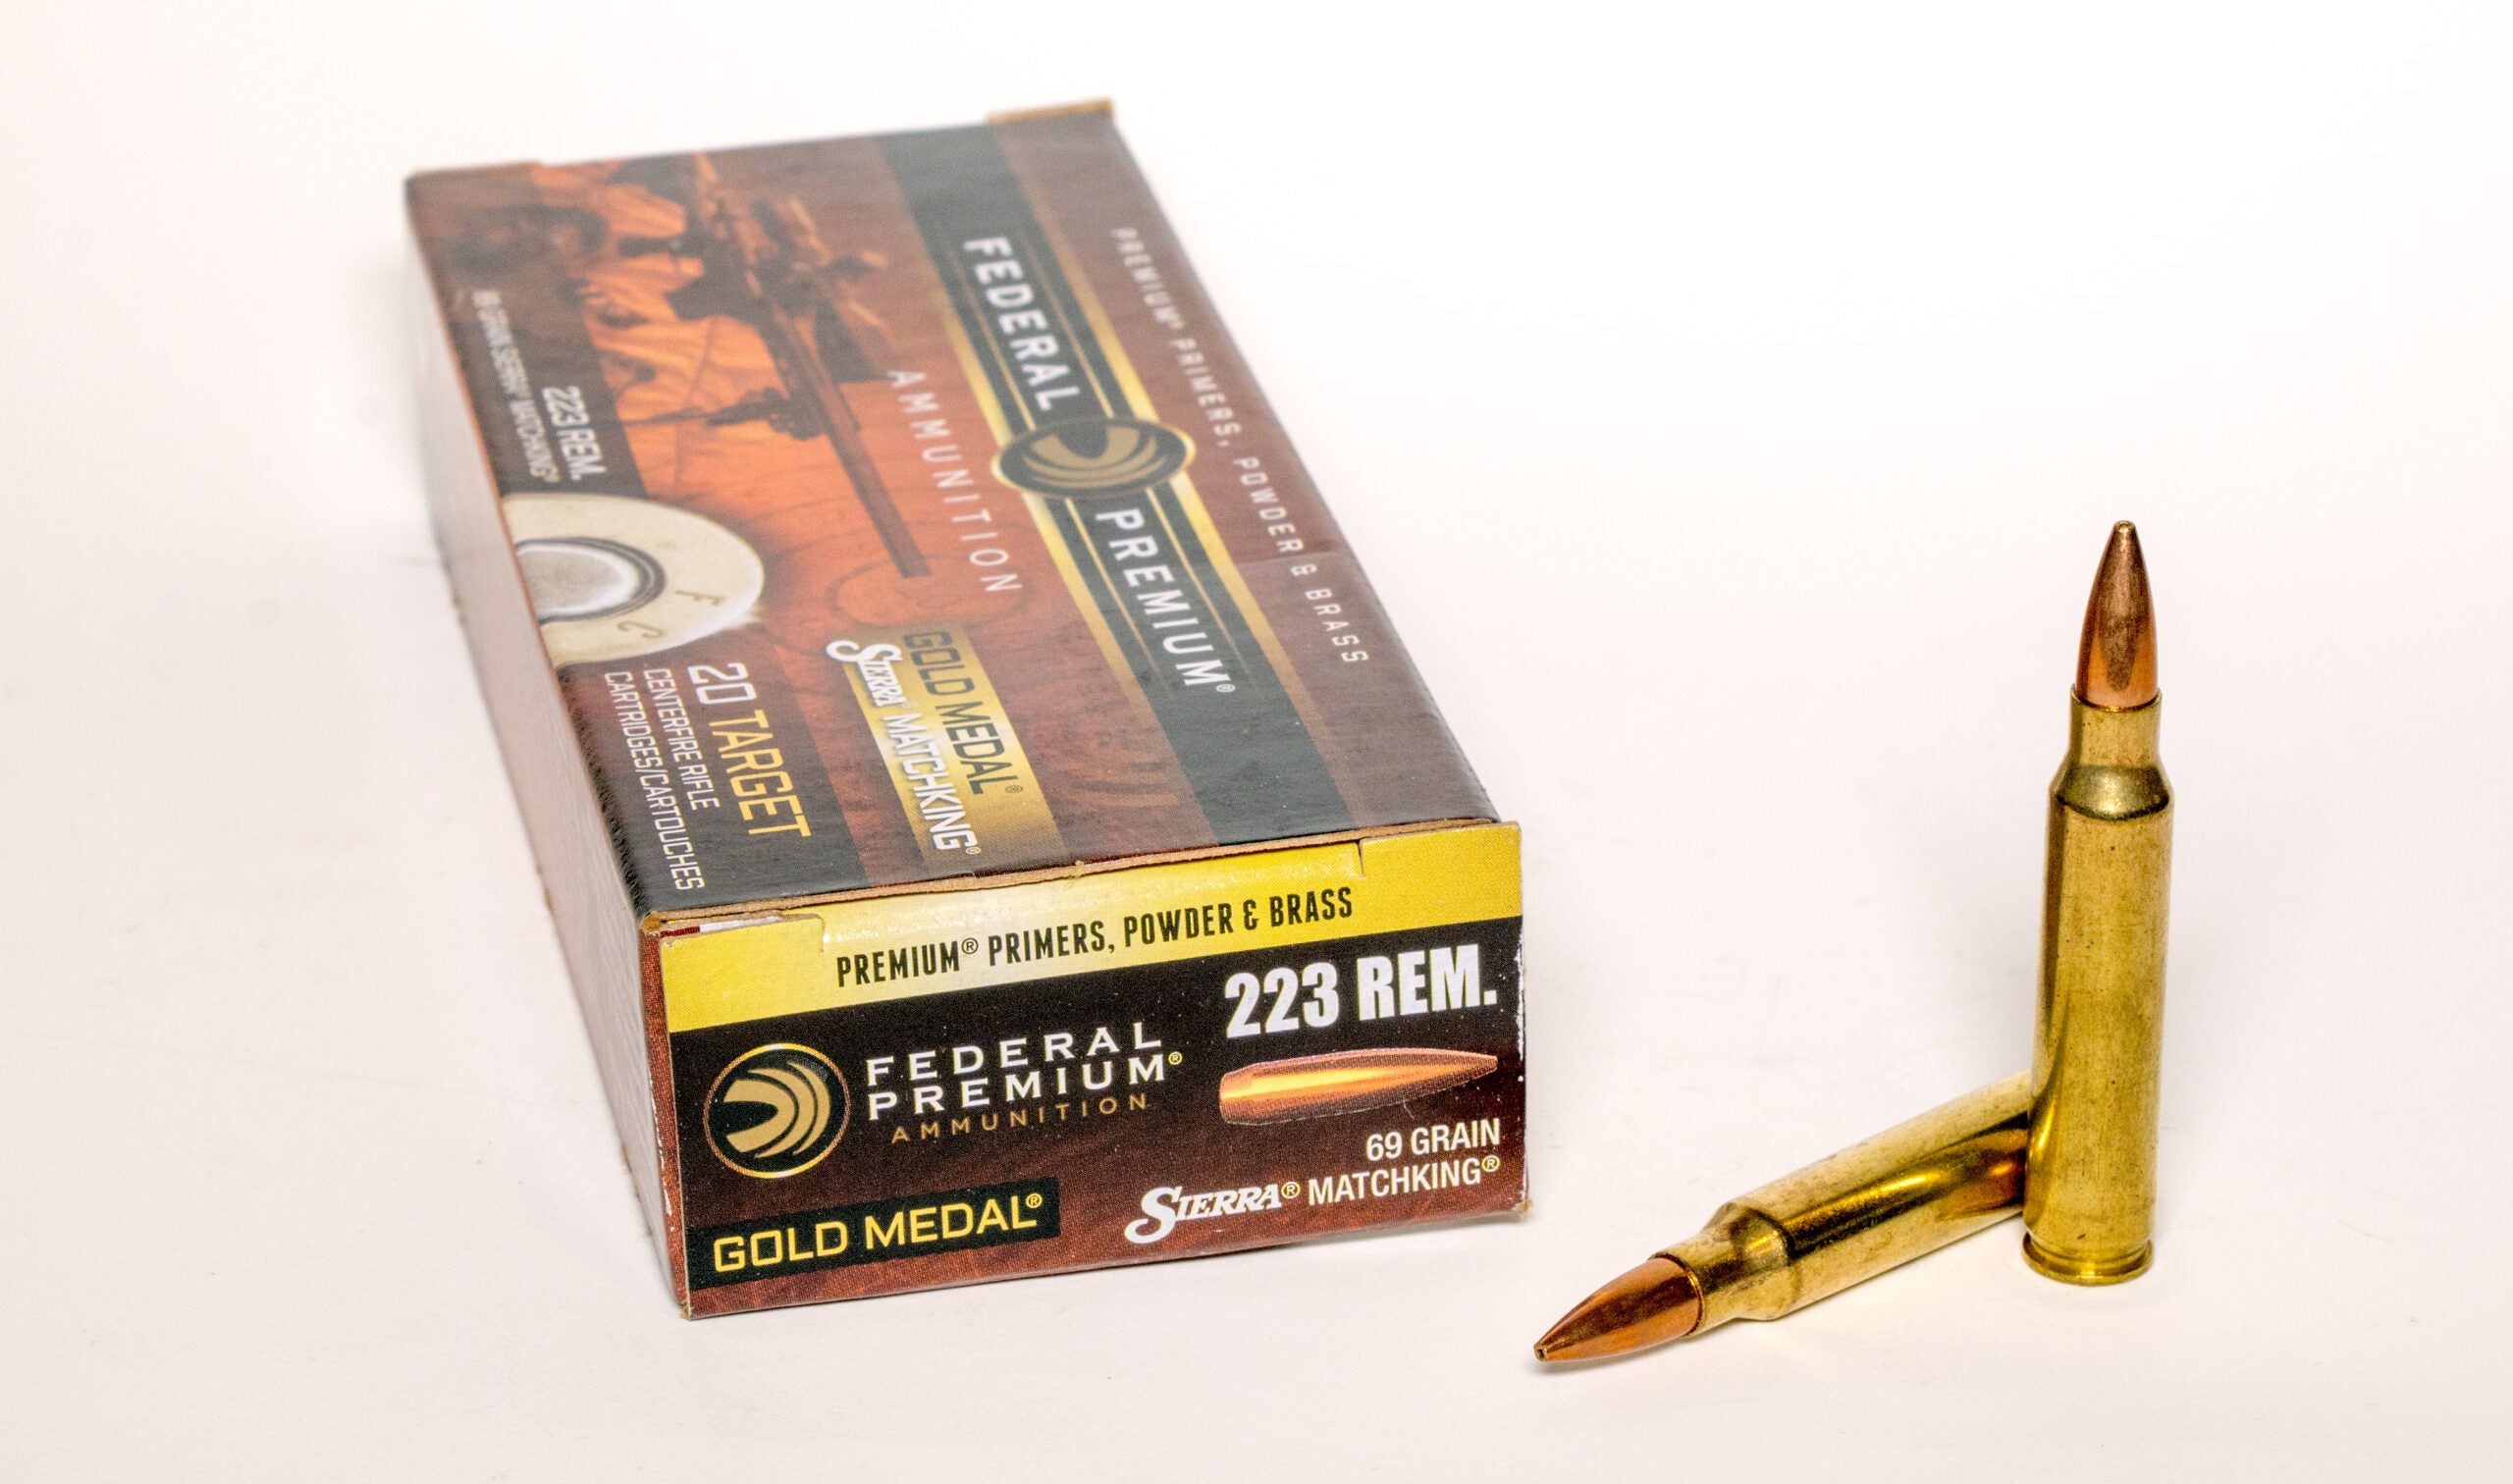 A box of 223 Rem ammo on a white background with two cartridges next to it.